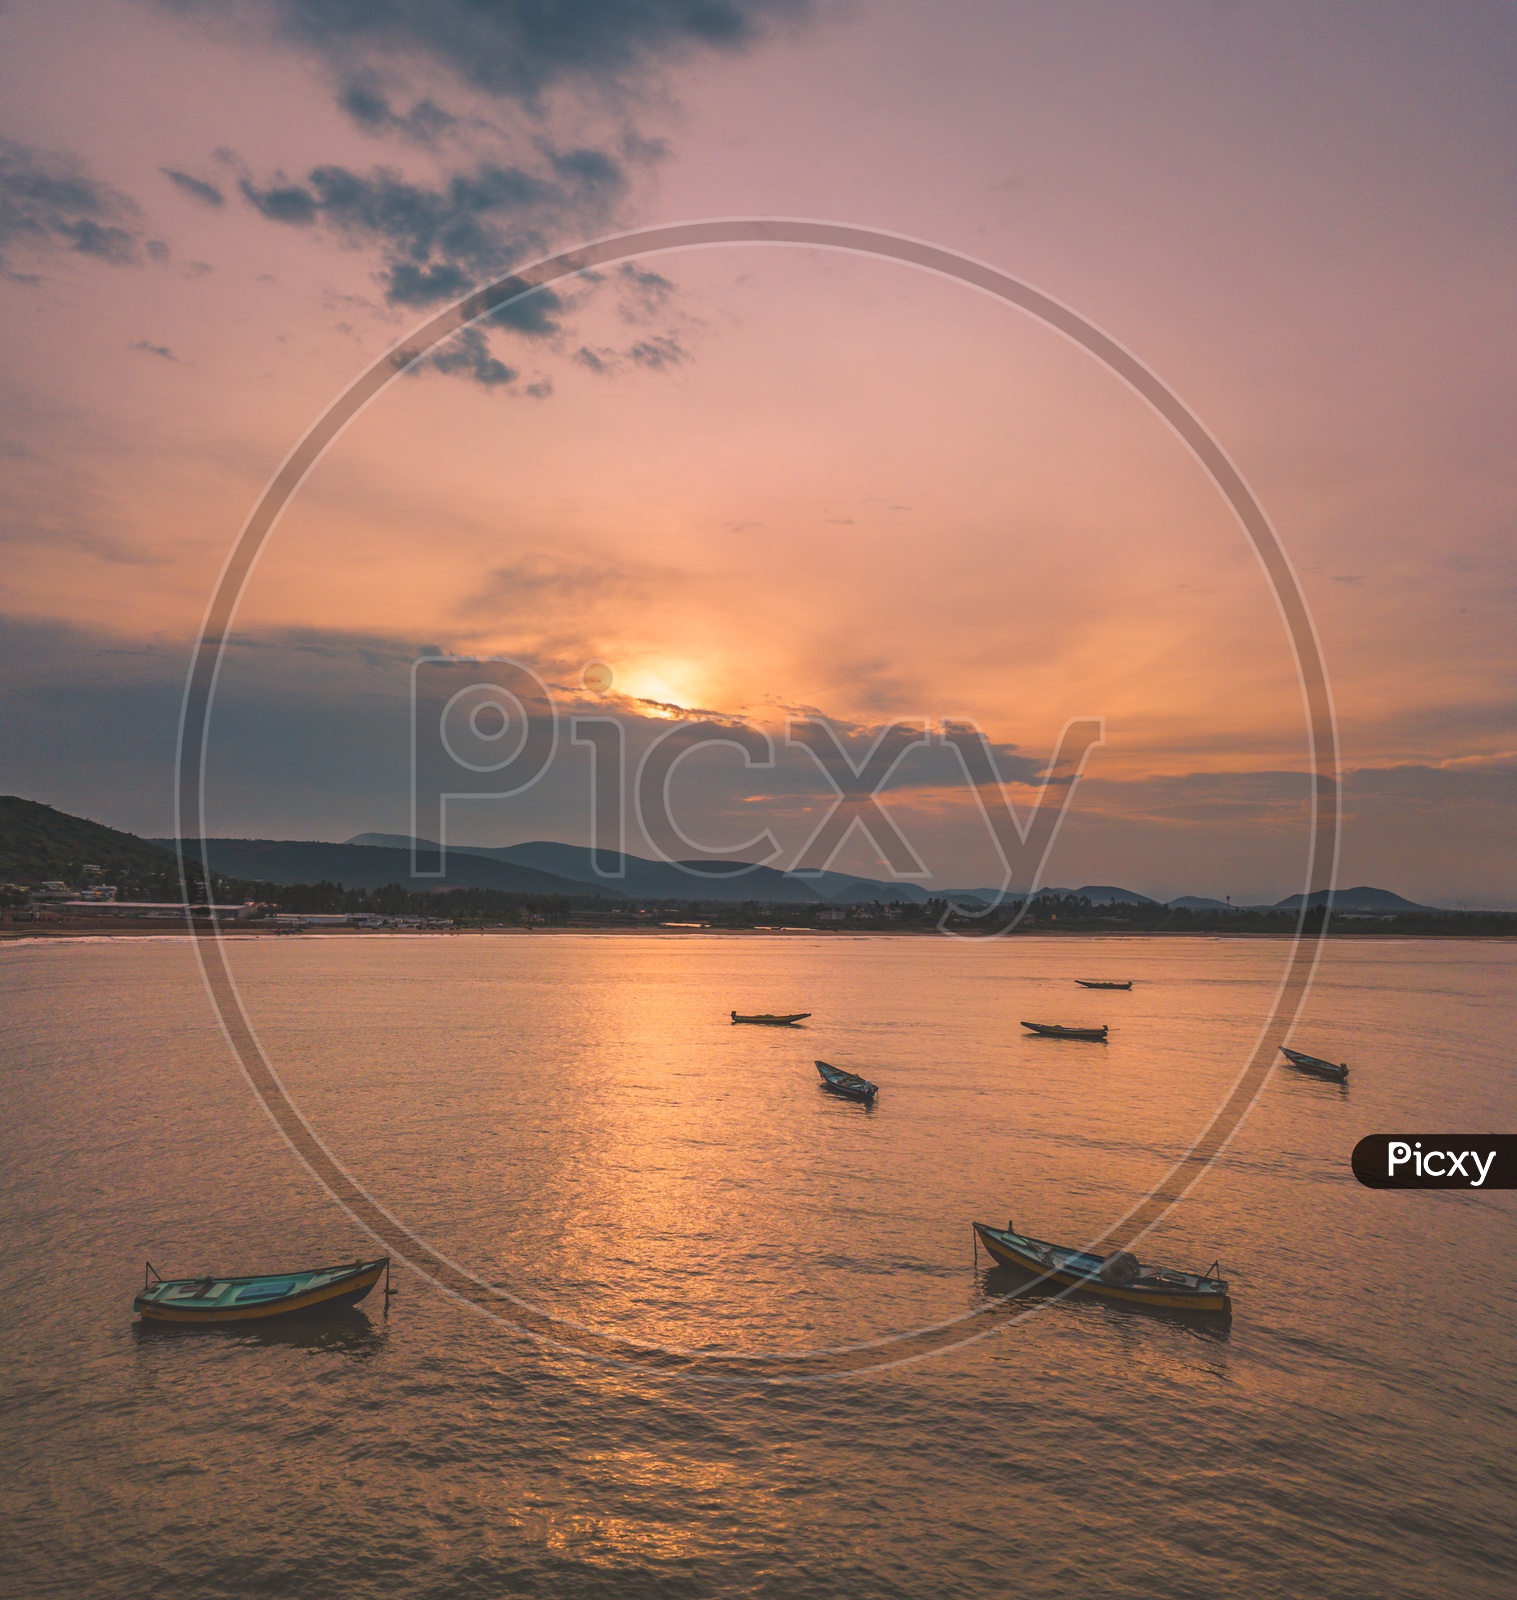 Fisherman Boats in Beach with Sunset in Background, Visakhapatnam